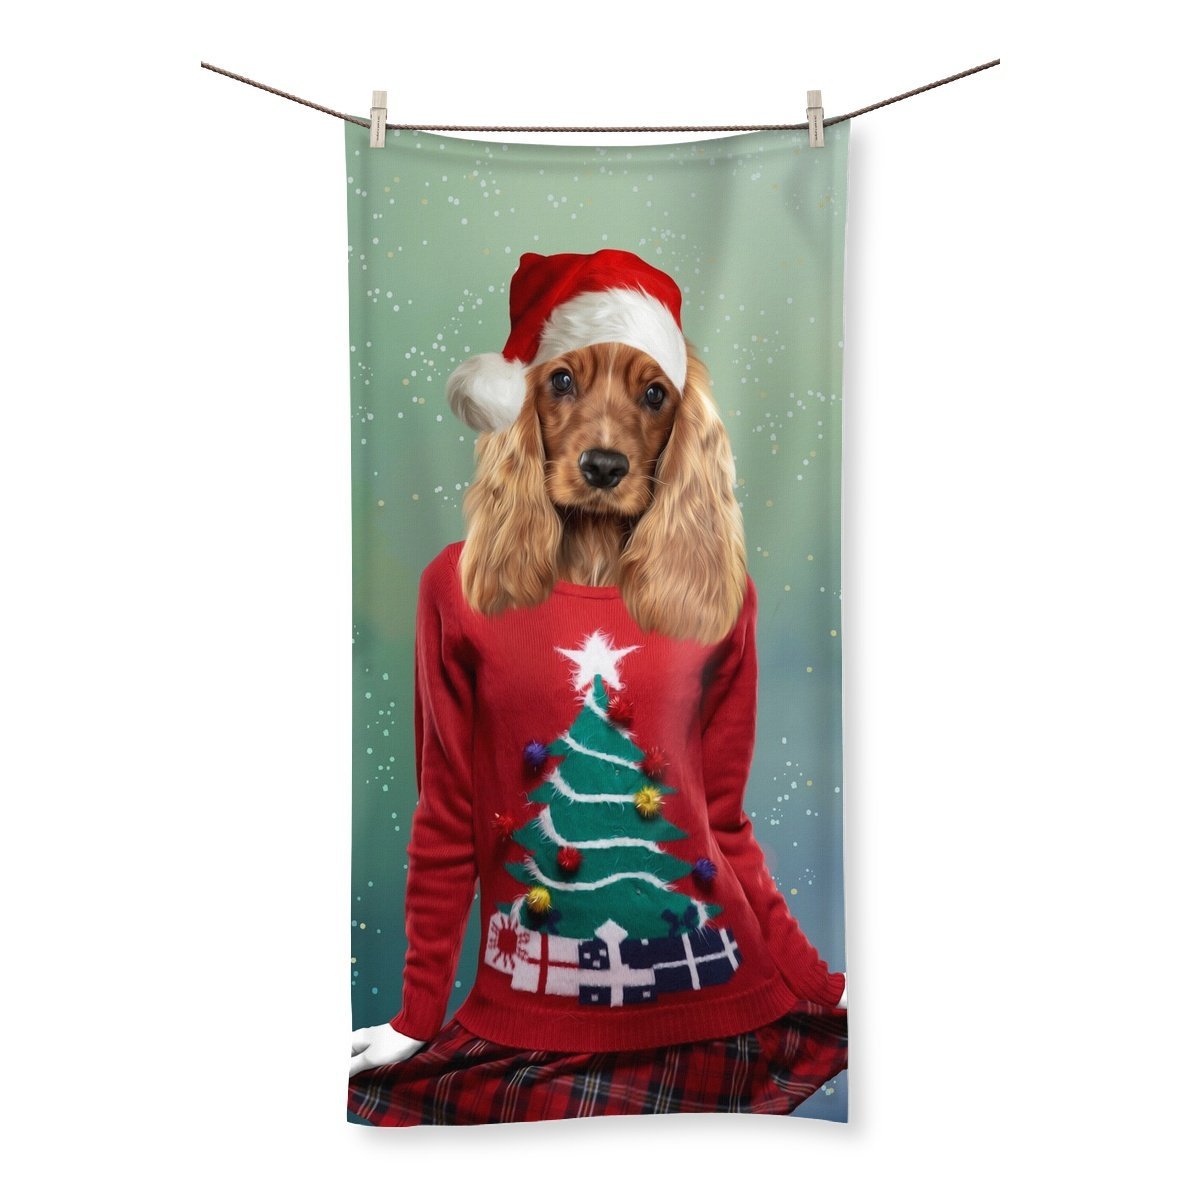 Christmas Jumper Chick: Custom Pet Towel - Paw & Glory - #pet portraits# - #dog portraits# - #pet portraits uk#Paw & Glory, pawandglory, original pet portraits, dog canvas art, pictures for pets, minimal dog art, louvenir pet portrait, custom pet paintings, pet portraits,pet portraits Towel,